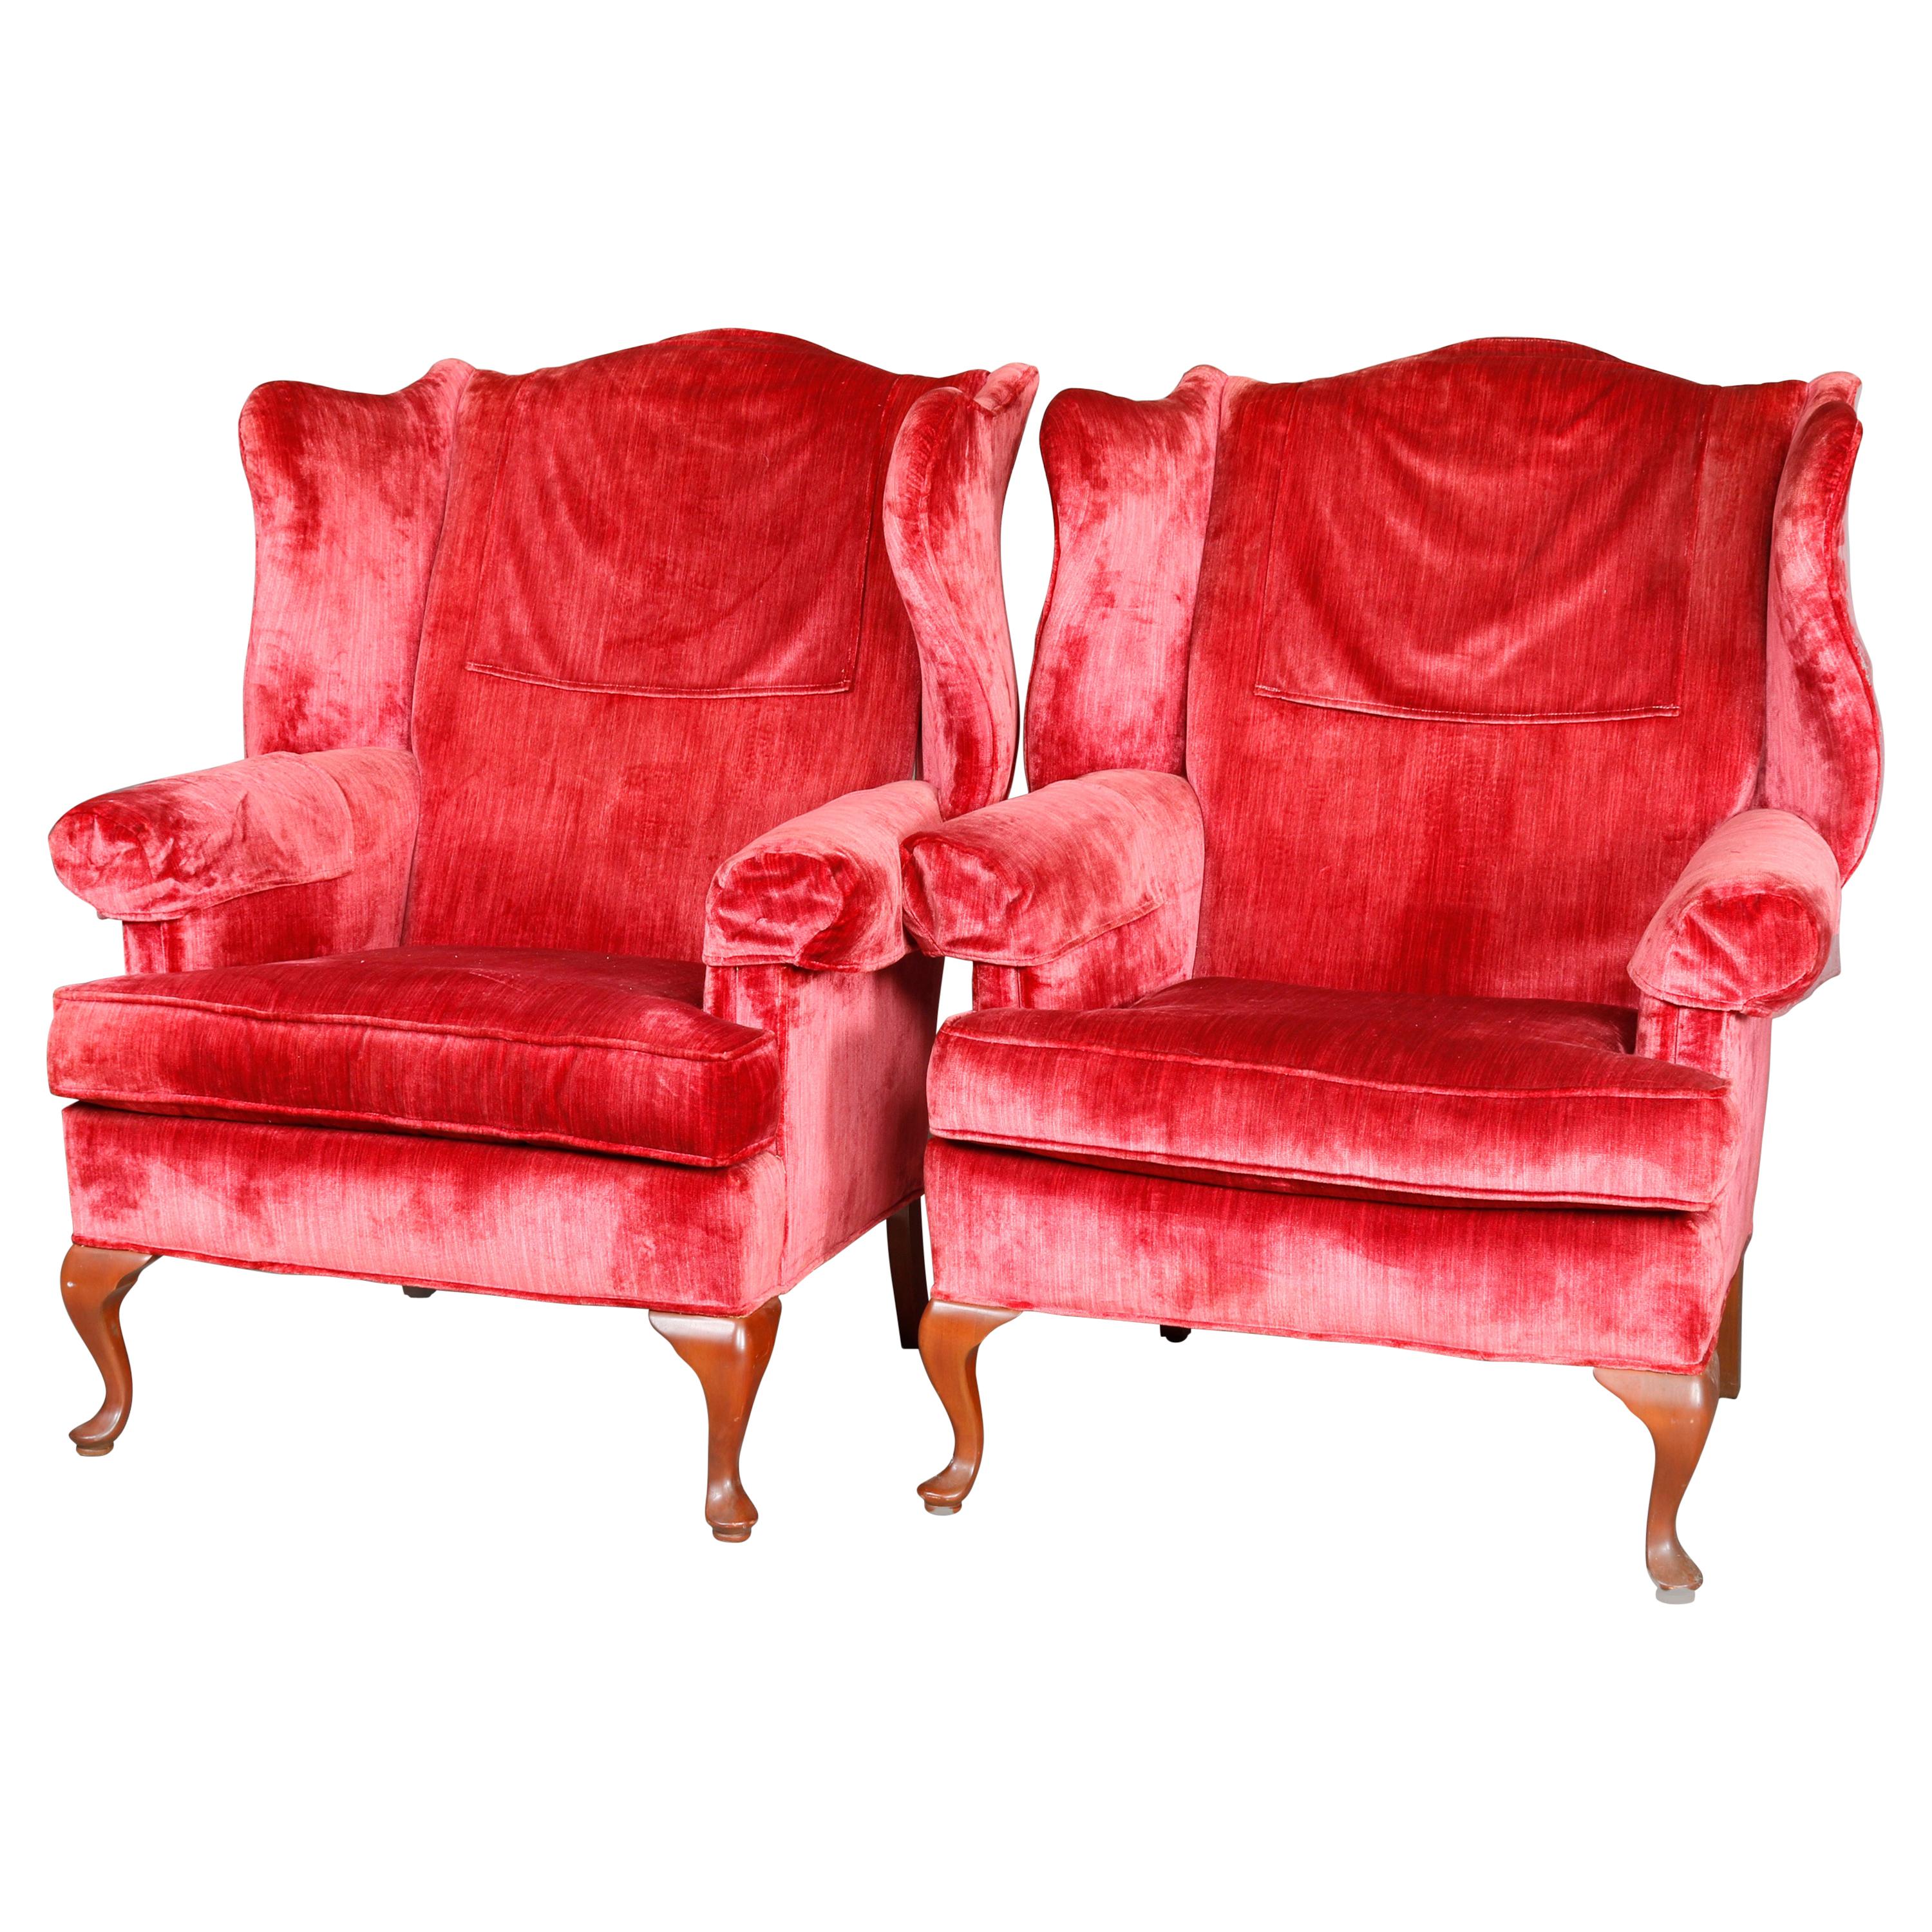 Pair Red Crushed Velvet & Mahogany Queen Anne Style Fireside Chairs, 20thC